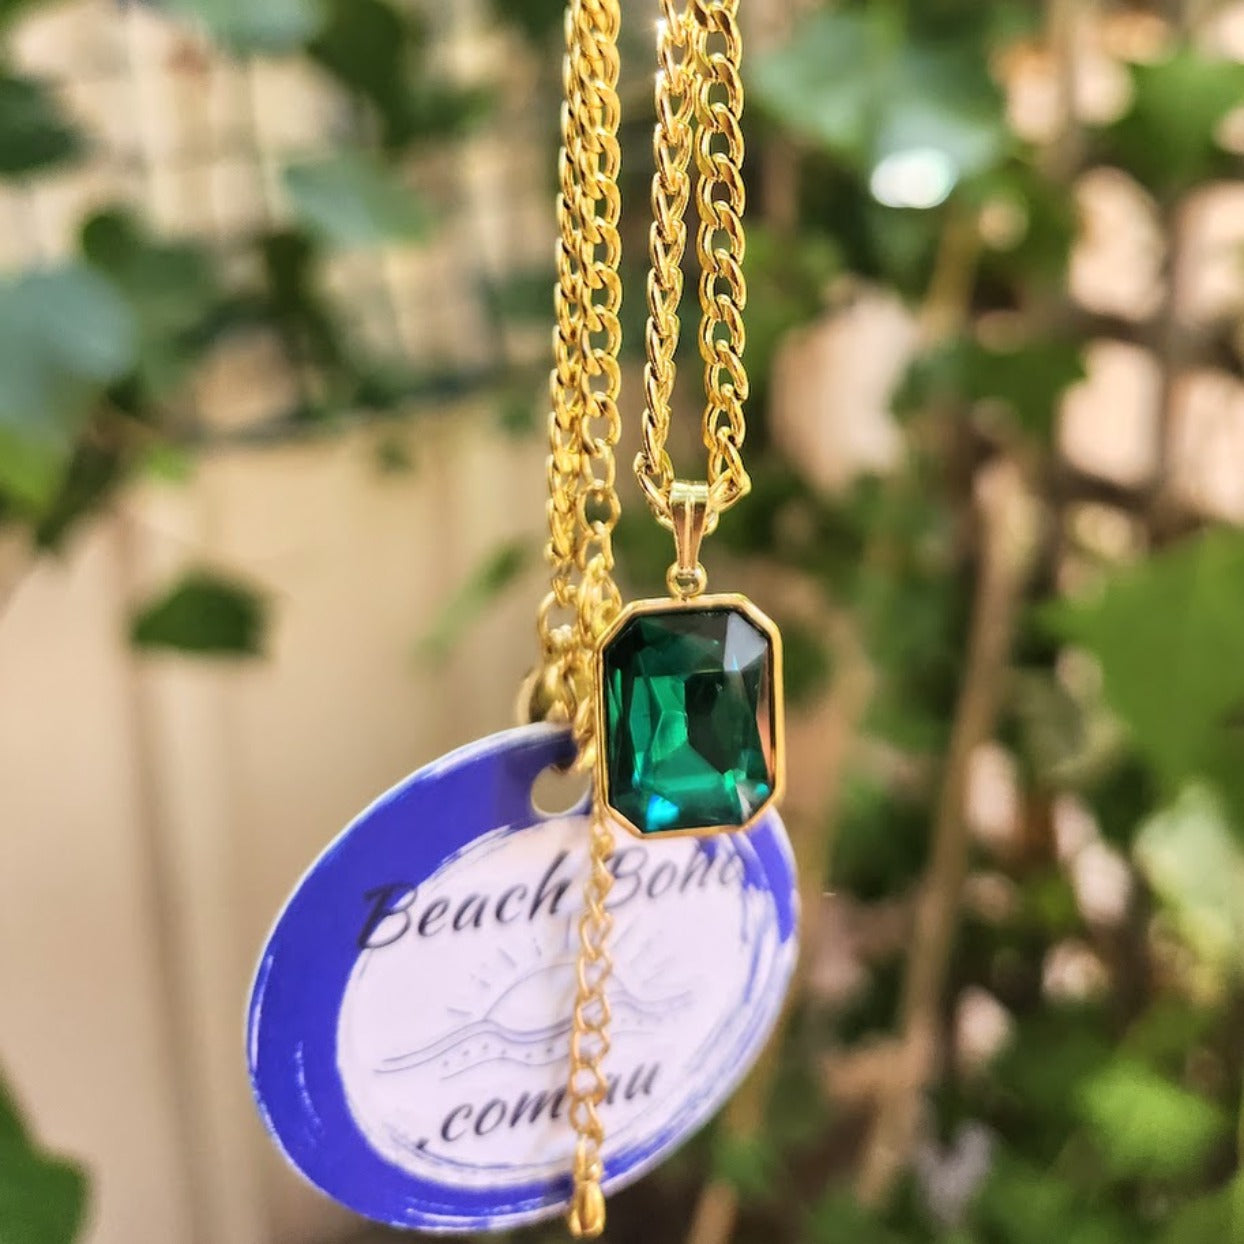 EMERALD GREEN CHARM NECKLACE - WATER PROOF NECKLACE - Premium necklaces from www.beachboho.com.au - Just $75! Shop now at www.beachboho.com.au